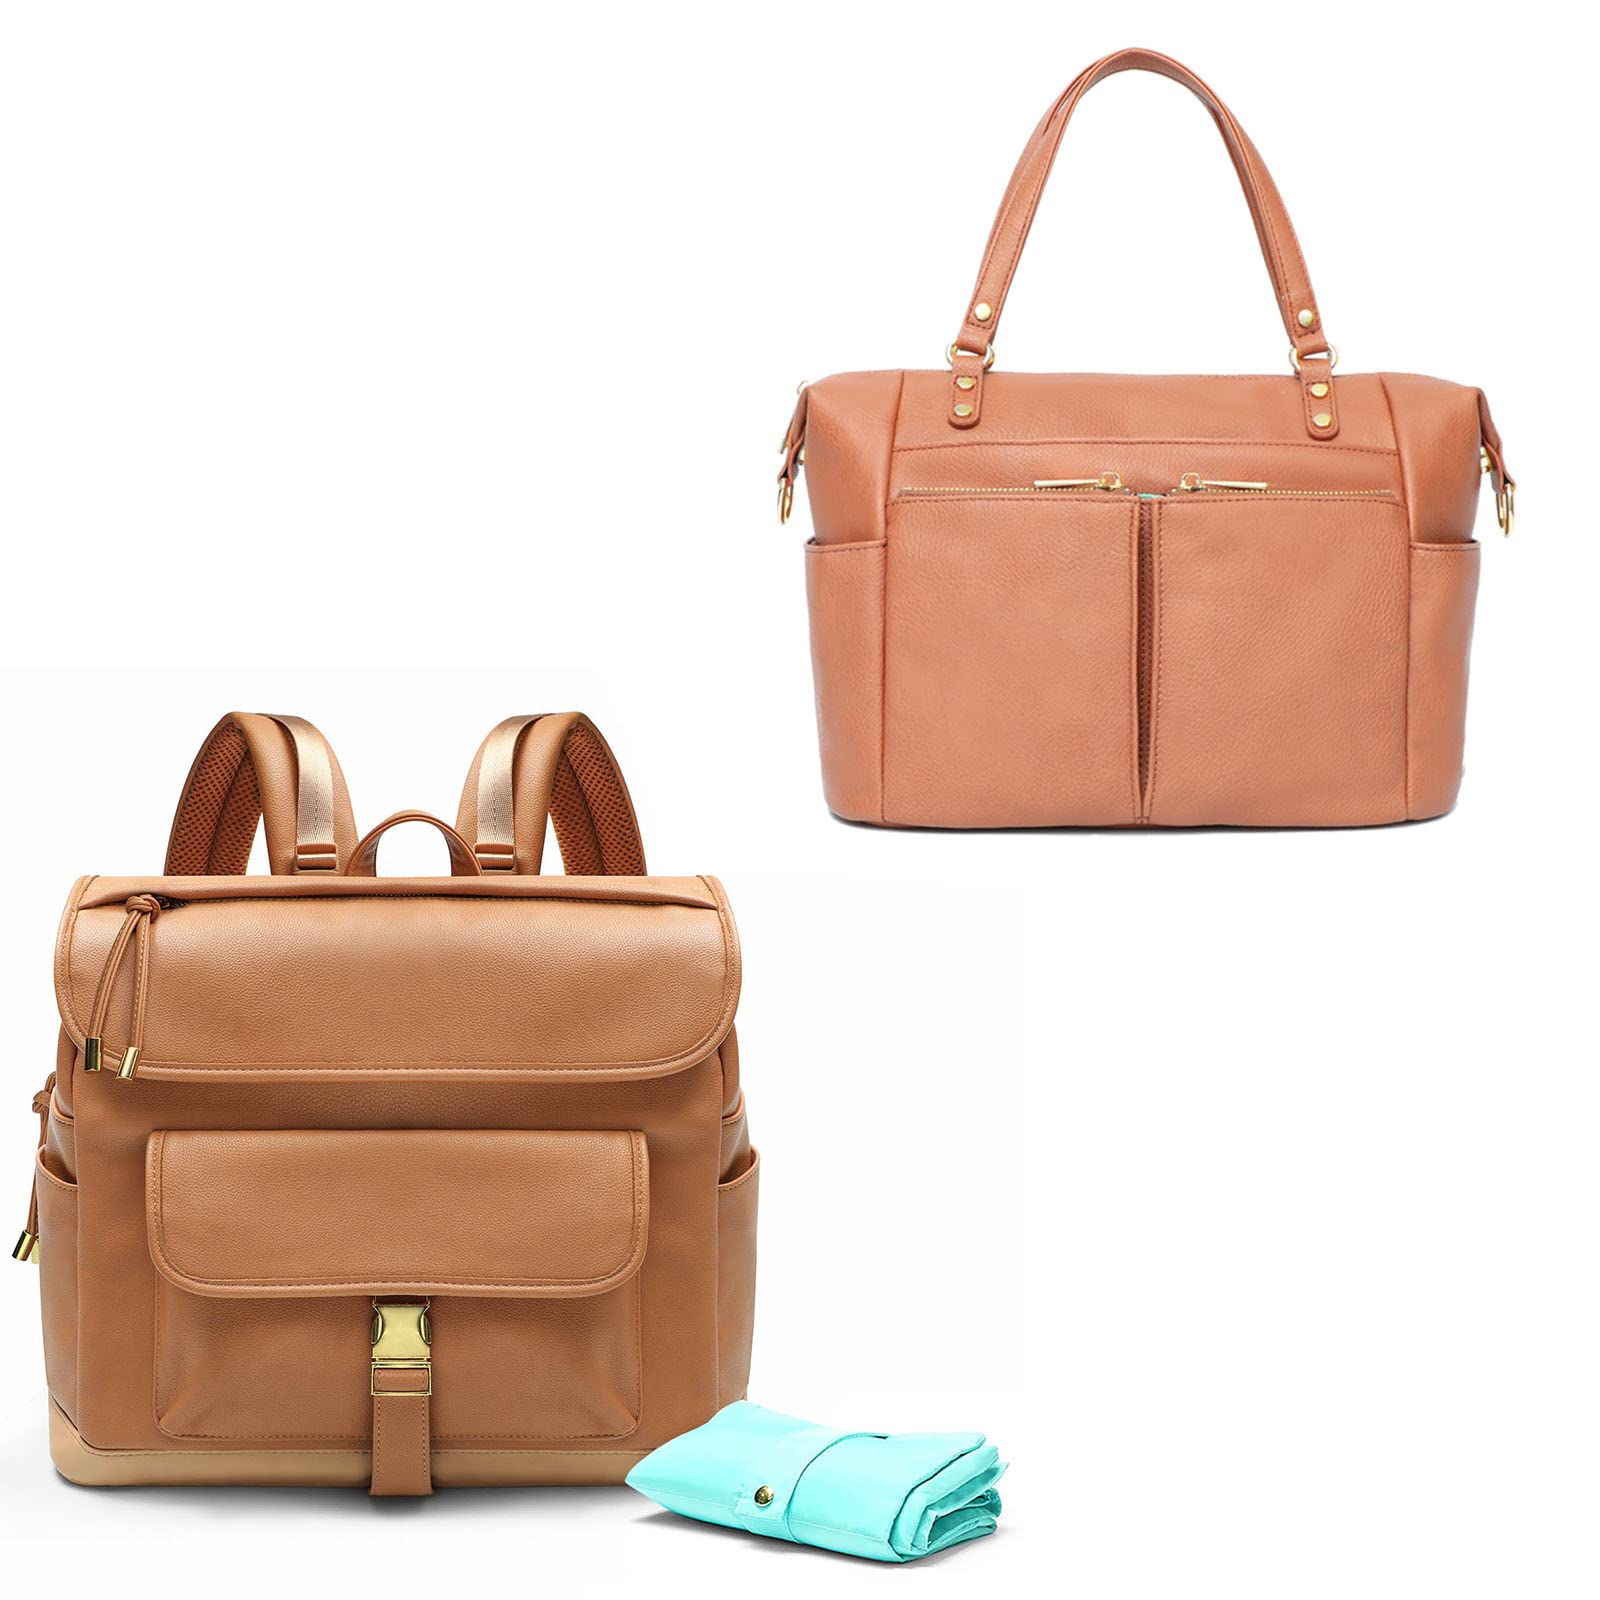 10 Best Diaper Bags for Busy Yet Fashionable Moms And Dads | PINKVILLA